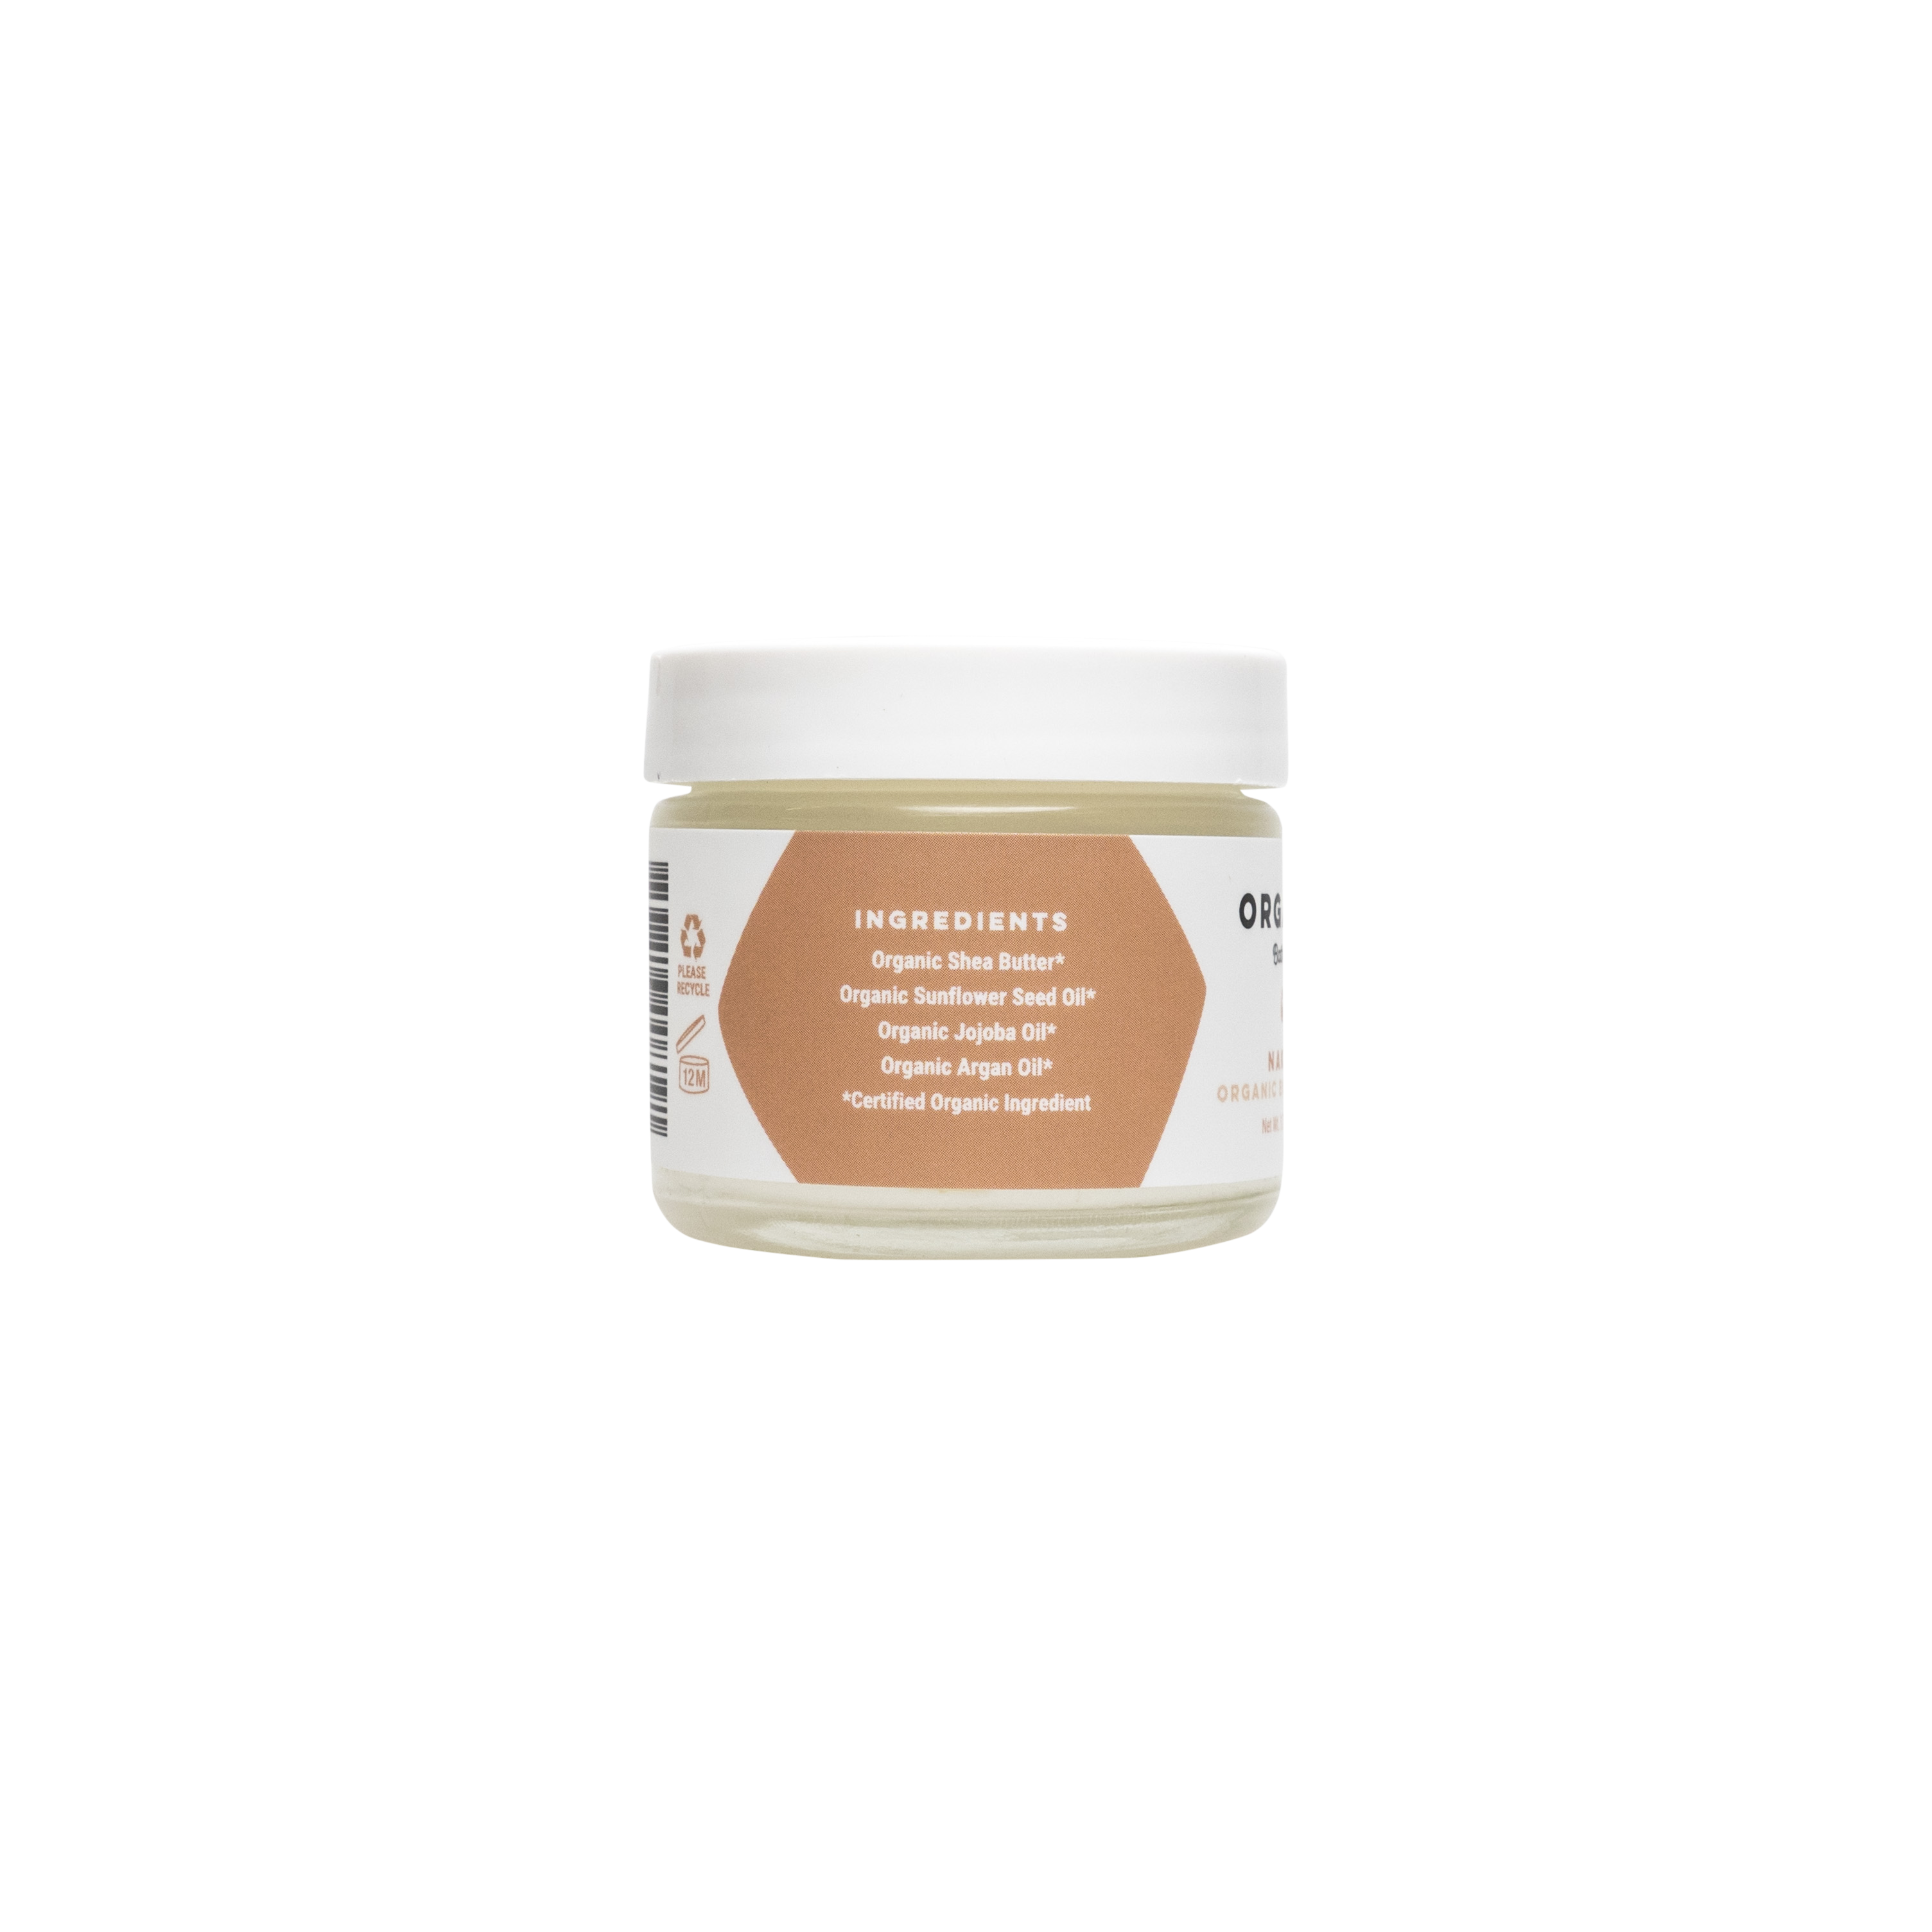 Organic Bath Co Naked Organic Body Butter Travel Size - NEW PACKAGING - AILLEA